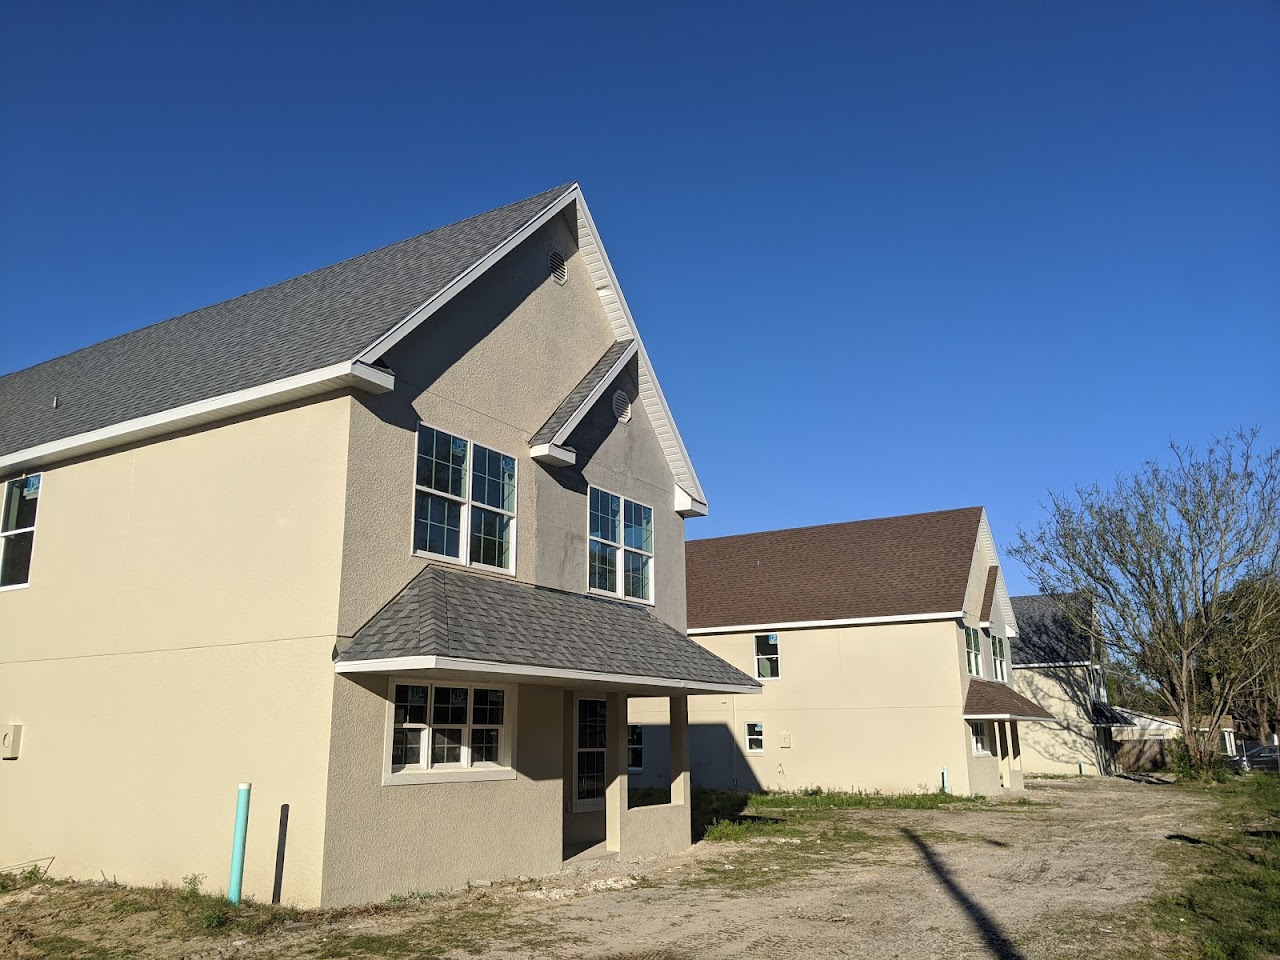 Photo of LAUREL PARK II. Affordable housing located at 100 NW 23RD AVE OCALA, FL 34475